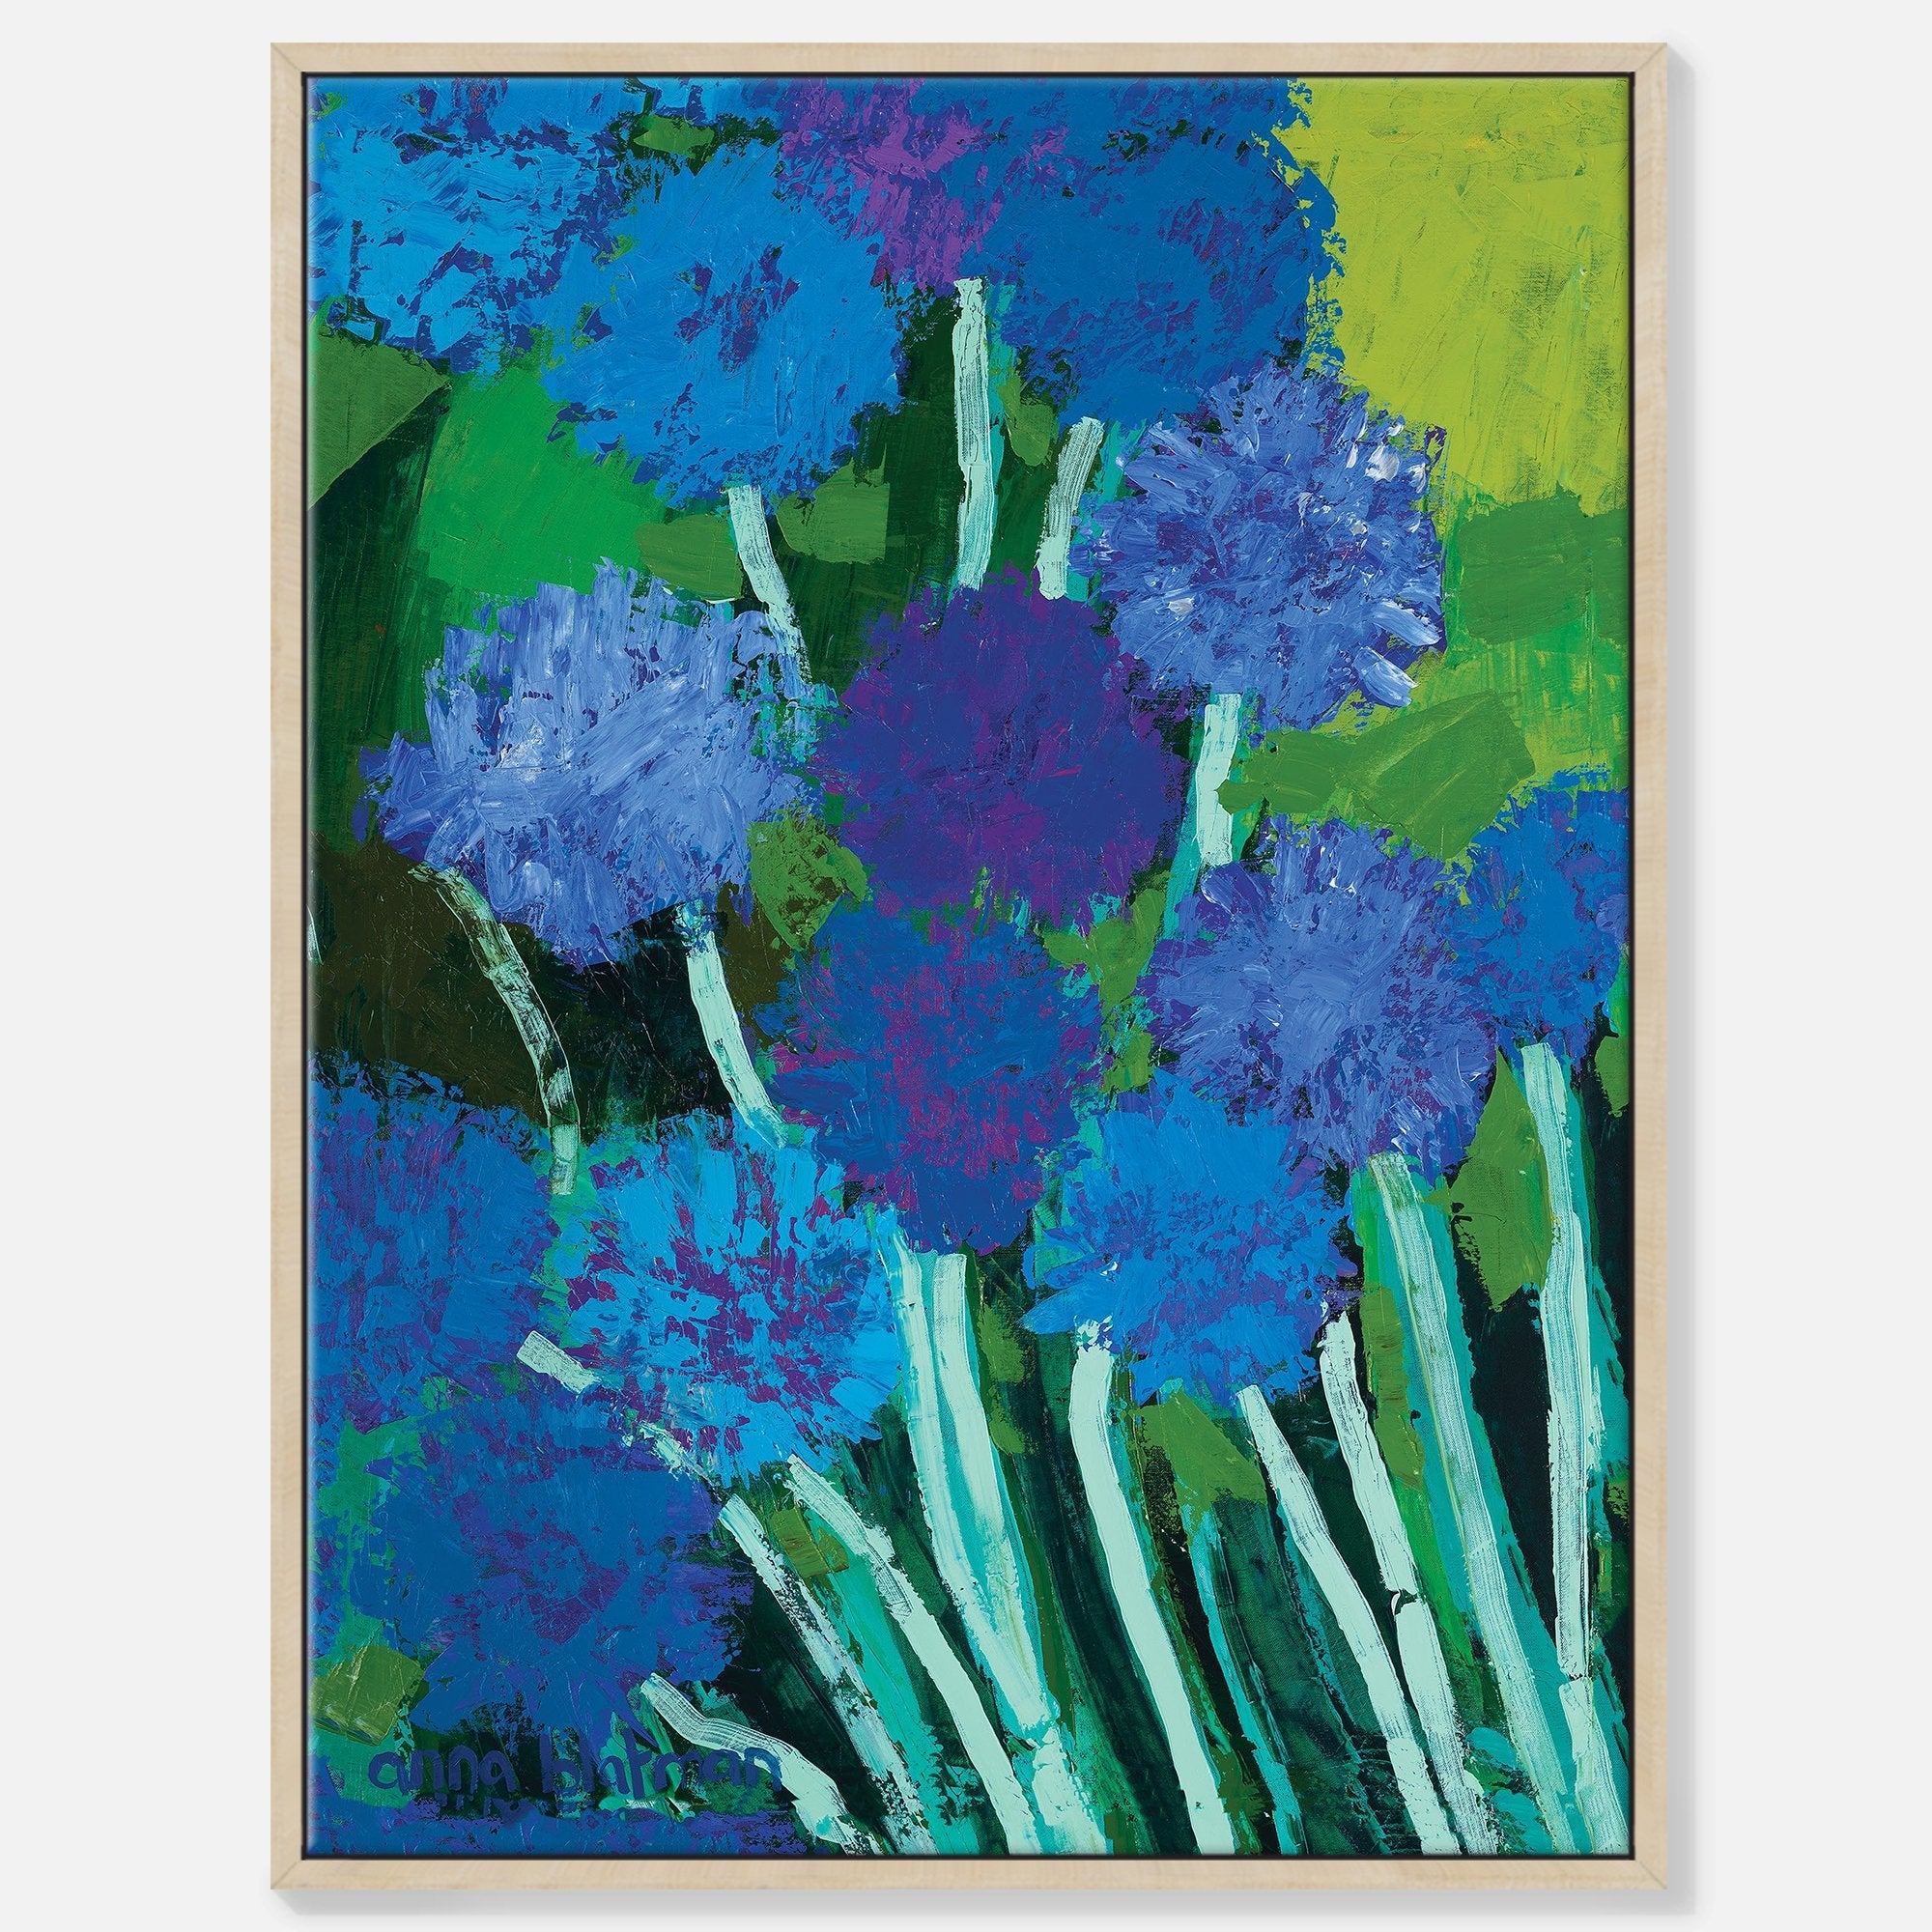 Adeline - Gallery Wrapped Canvas